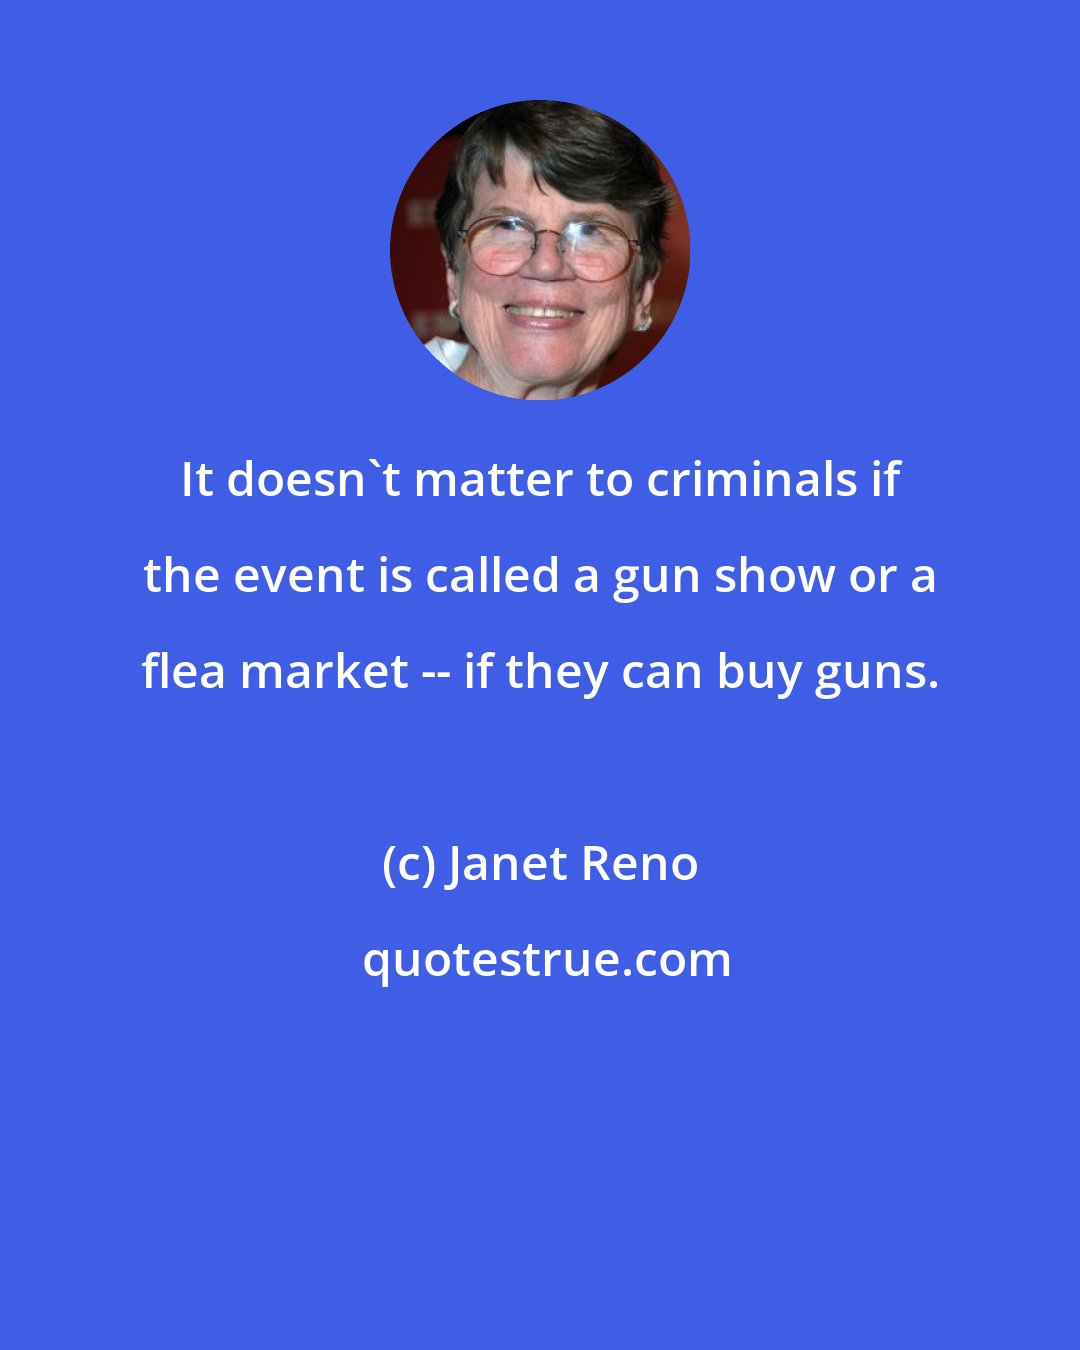 Janet Reno: It doesn't matter to criminals if the event is called a gun show or a flea market -- if they can buy guns.